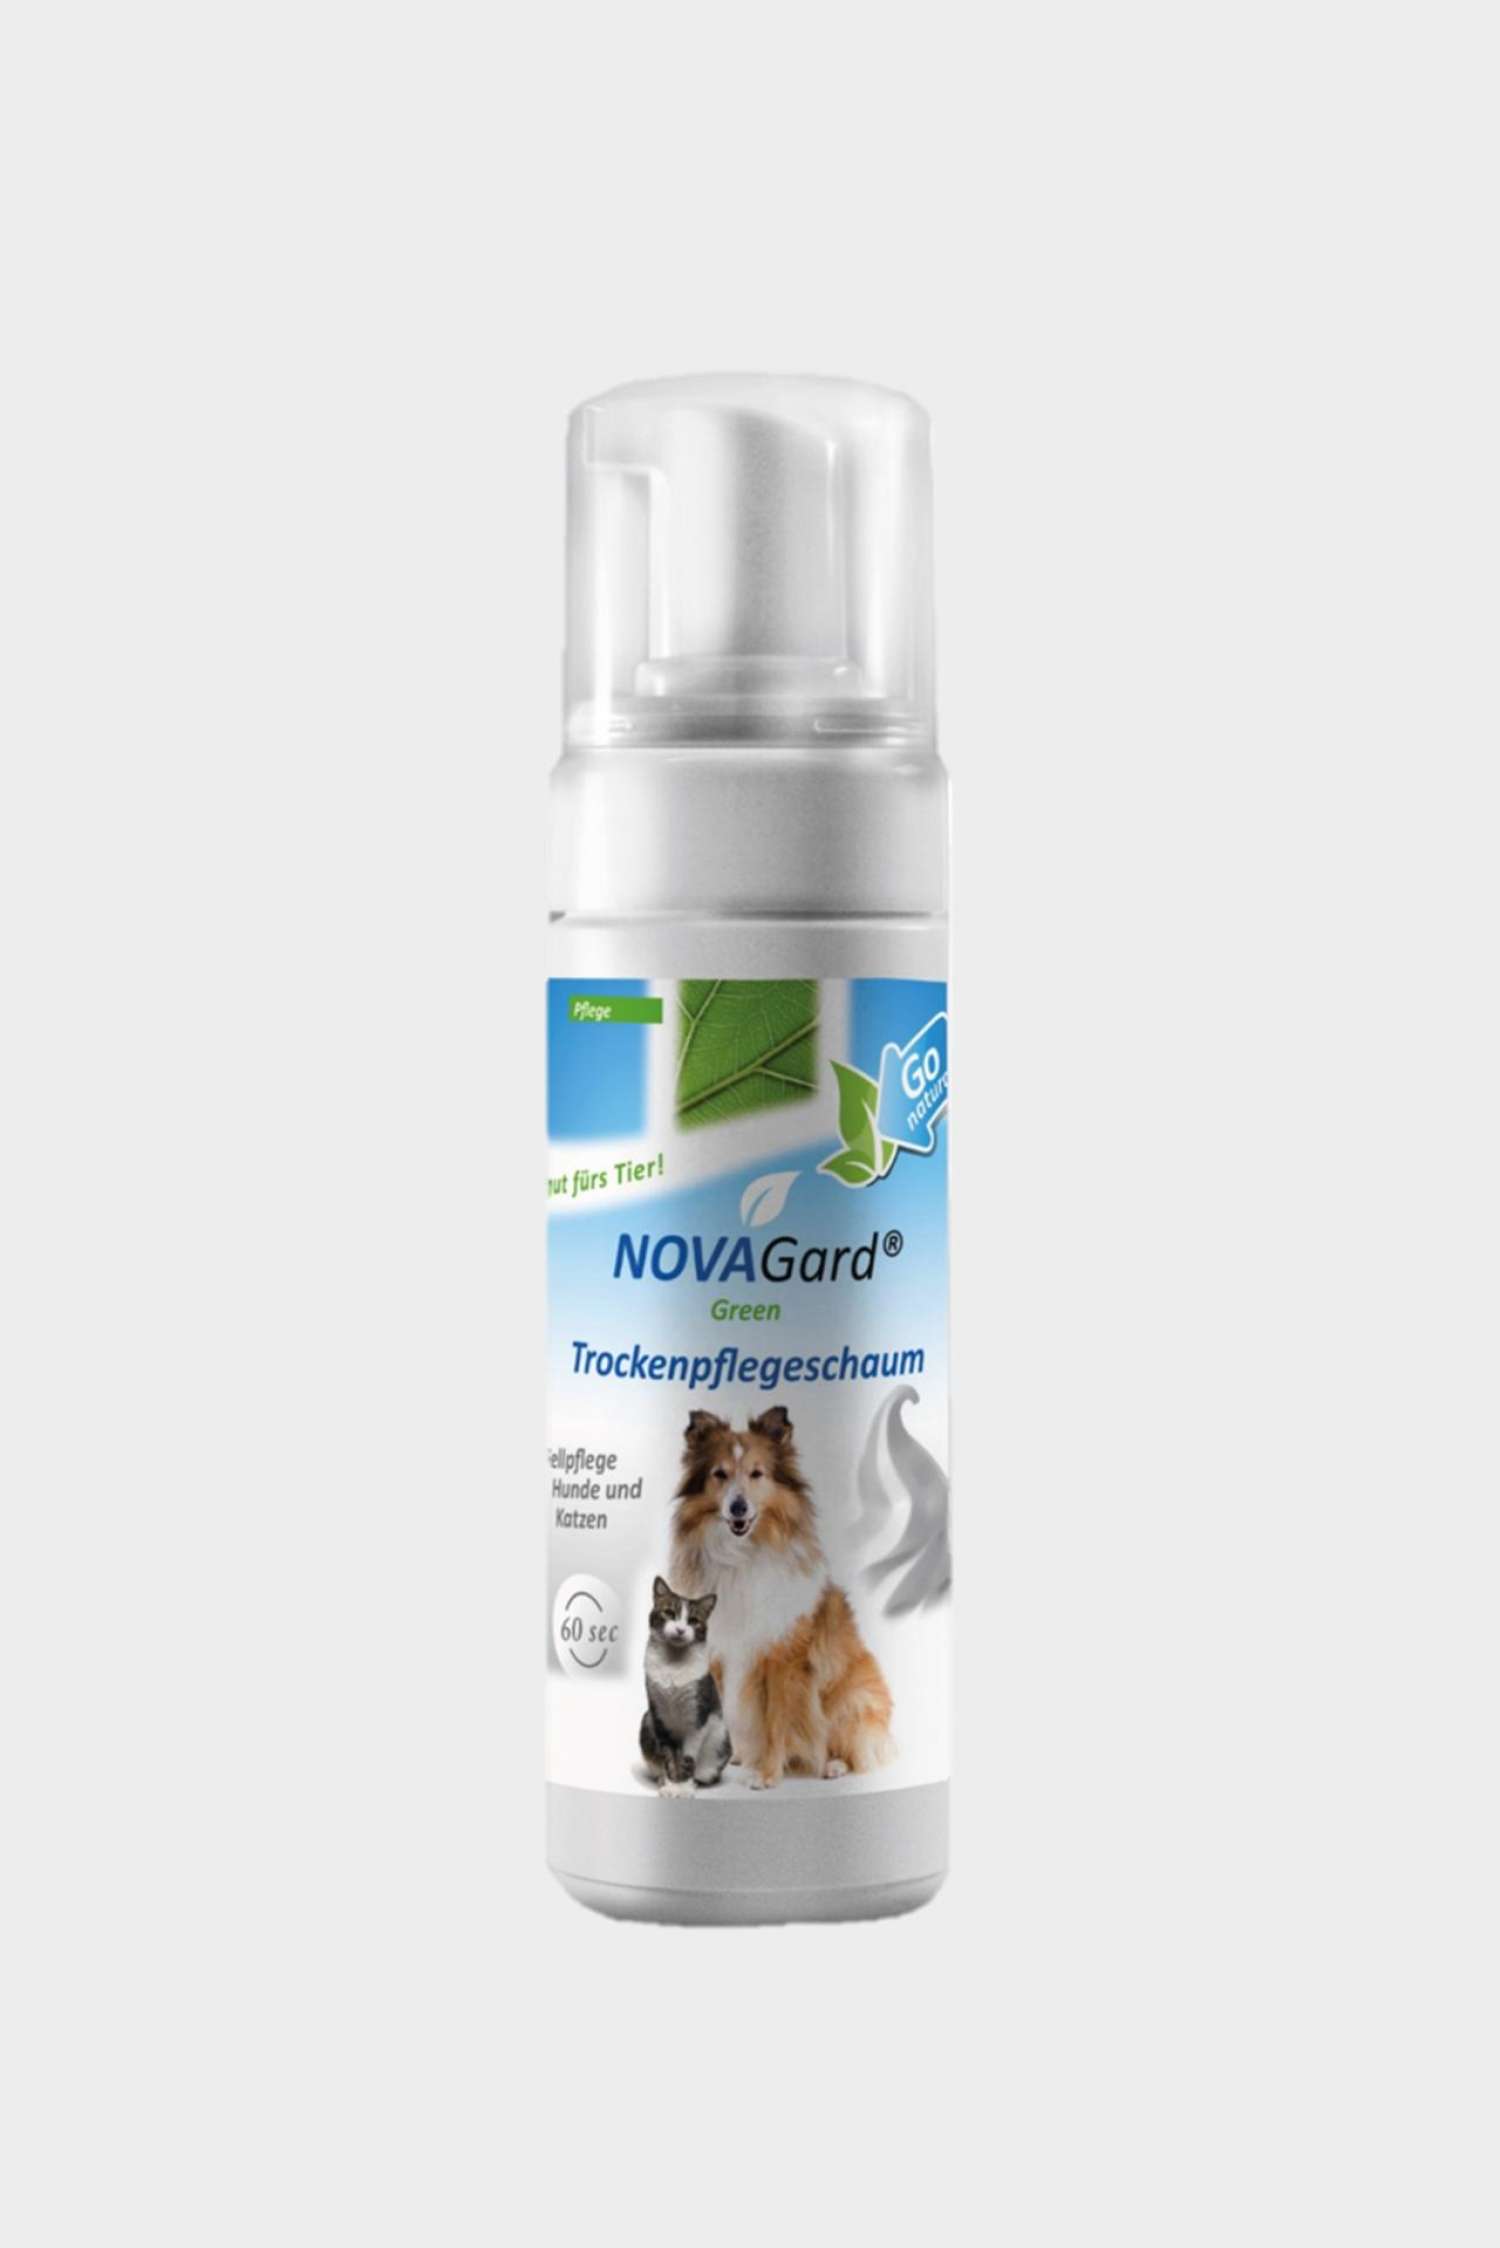 NovaGard Green dry foam care for dogs & cats